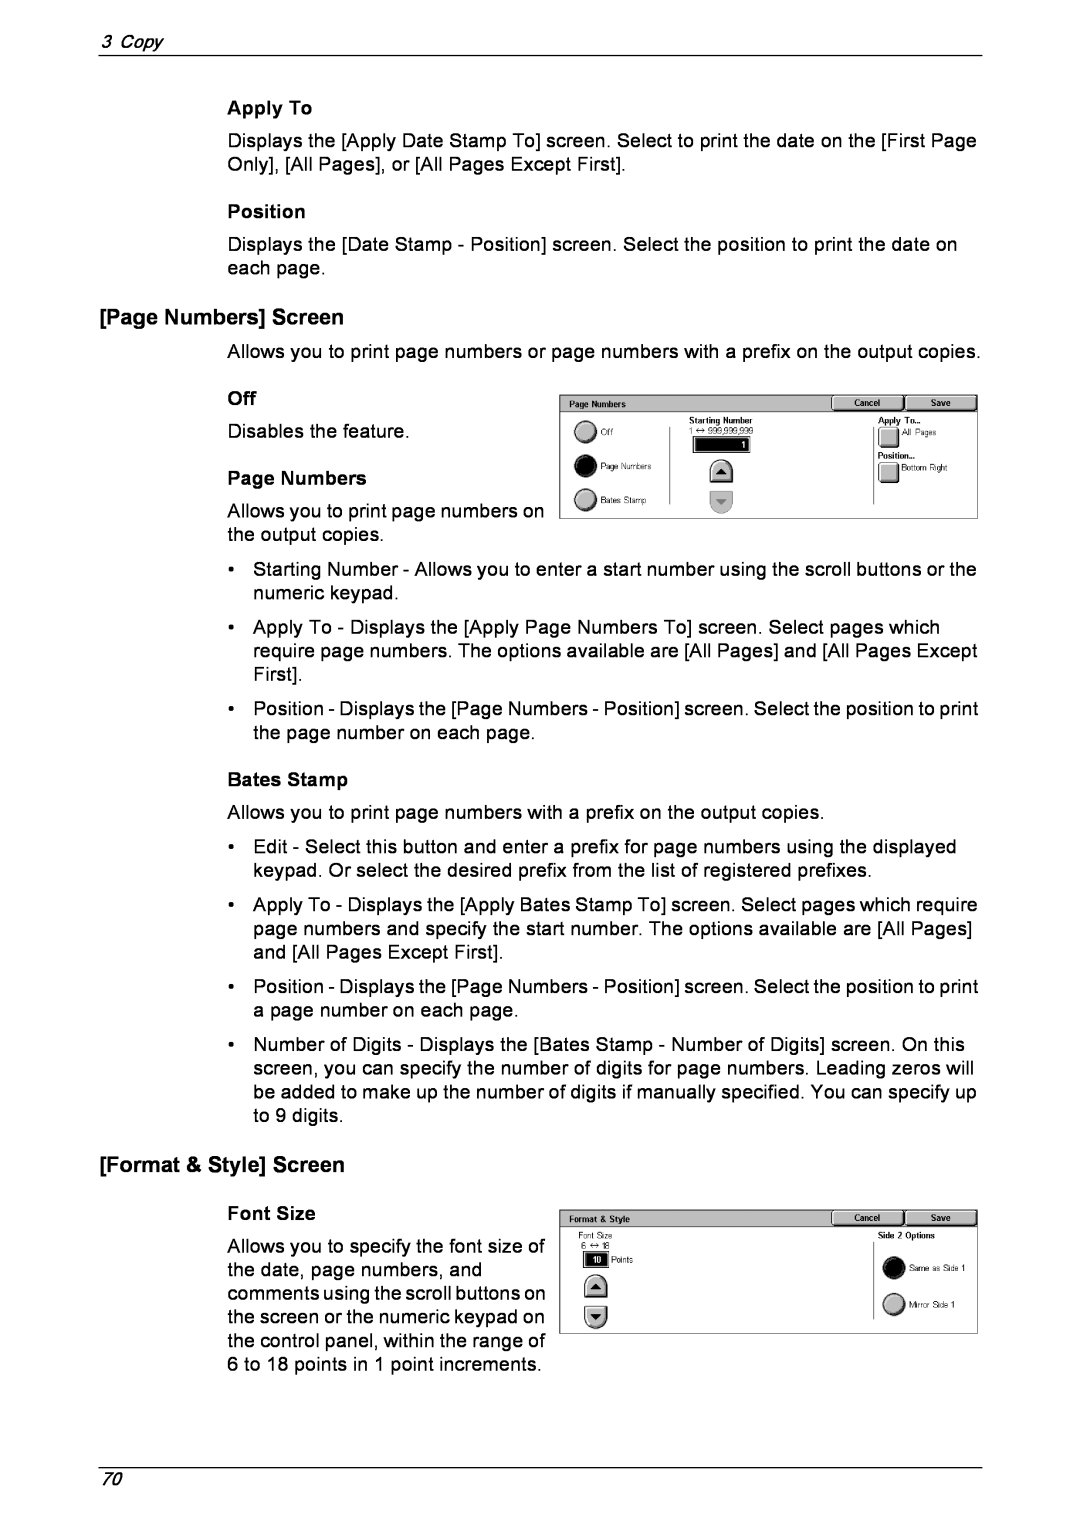 Xerox 5230 manual Page Numbers Screen, Format & Style Screen, Bates Stamp, Font Size, Apply To, Position 